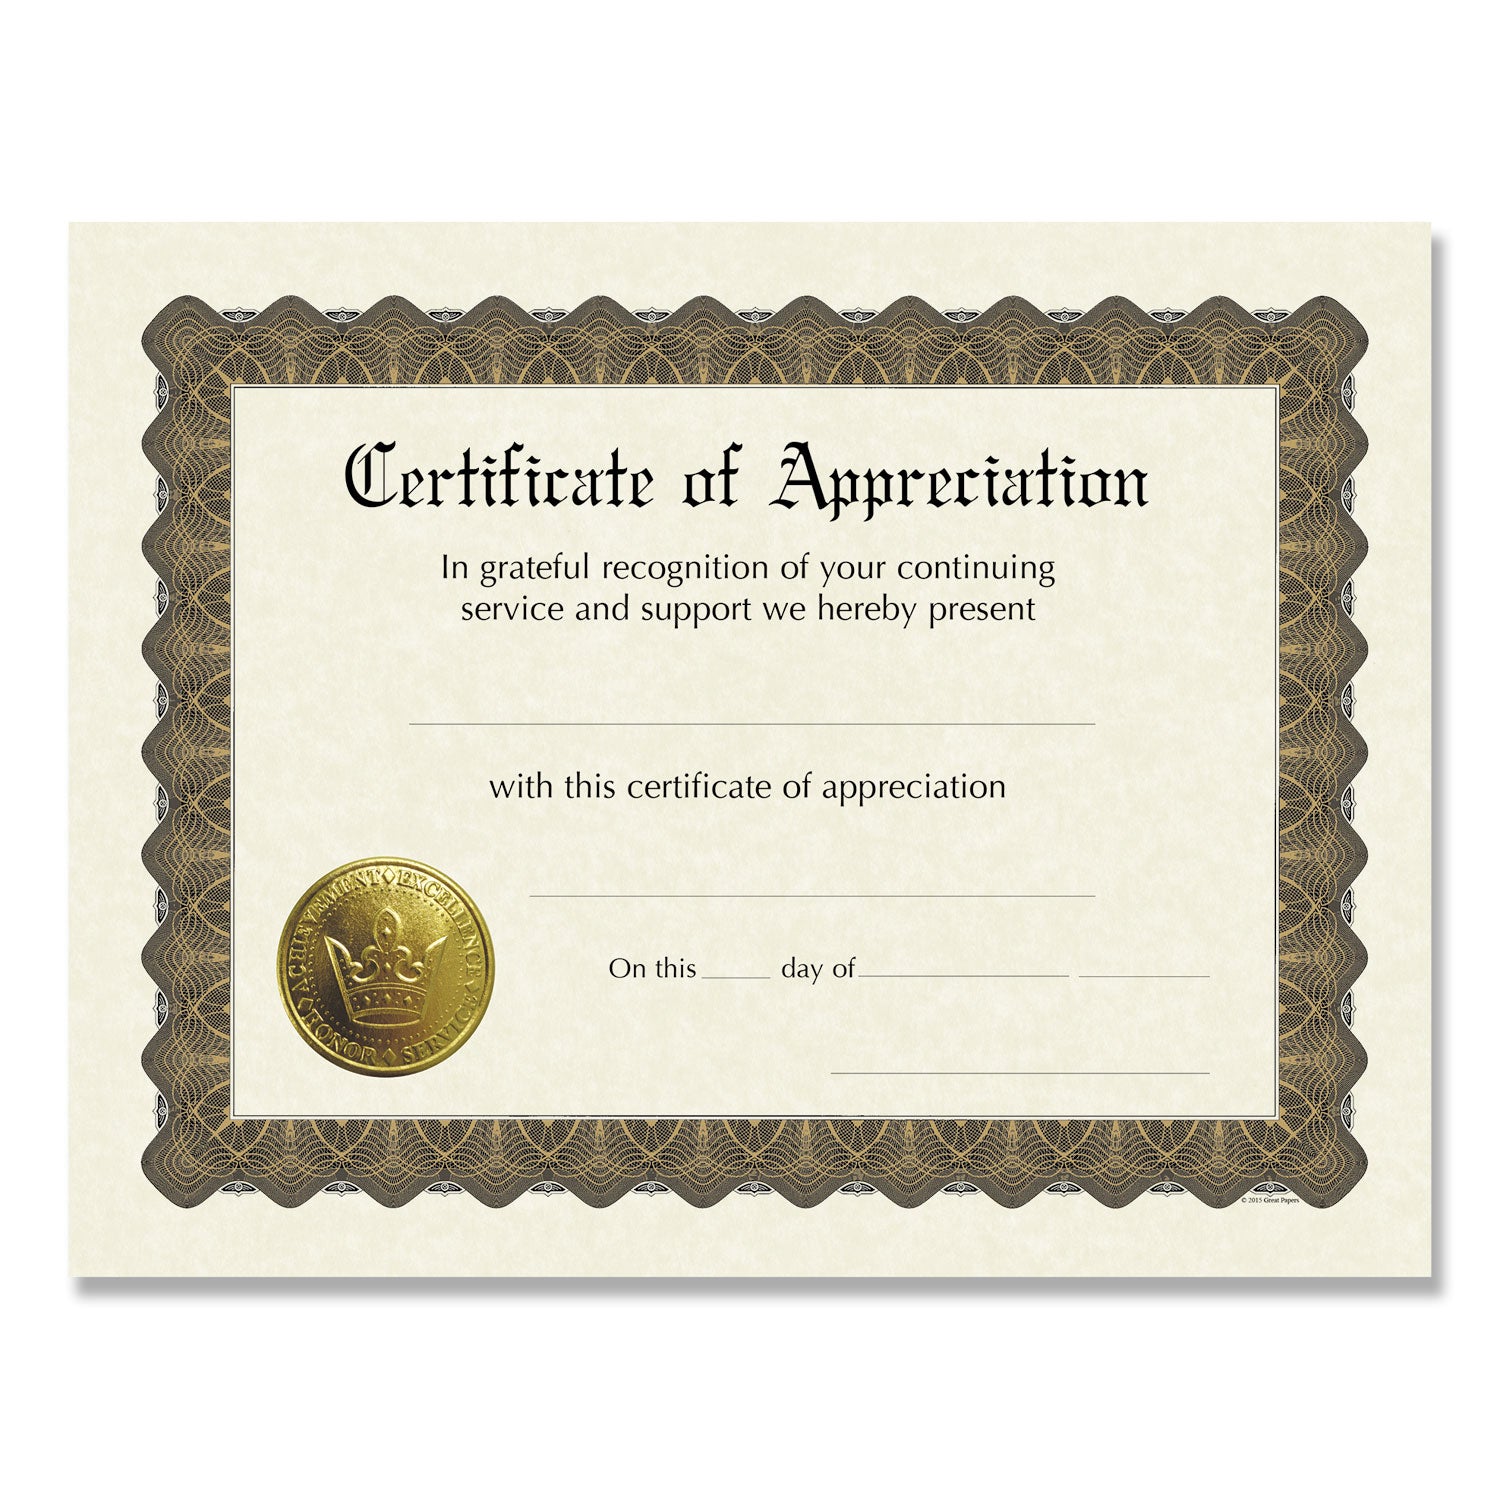 ready-to-use-certificates-appreciation-11-x-85-ivory-brown-gold-colors-with-brown-border-6-pack_cos930000 - 1